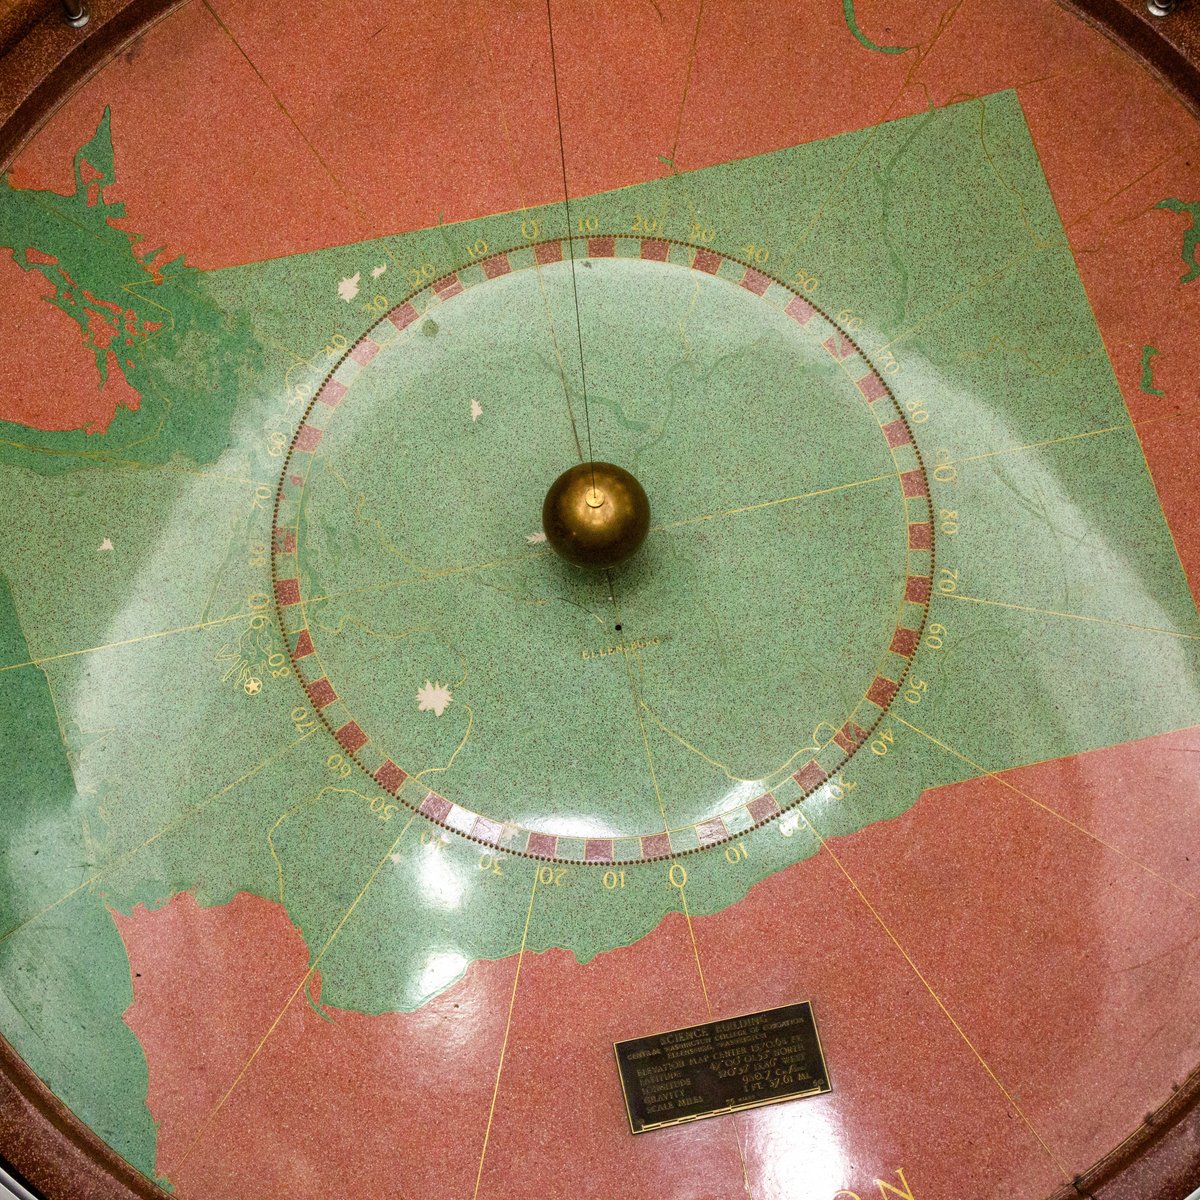 Remembering the CWU's iconic pendulum! ⏳🏛️ A Foucault pendulum demonstrates the earth’s rotation by constantly changing direction of its apparent swing. Since 2004, CWU's Physics Students aimed to revive this iconic symbol.